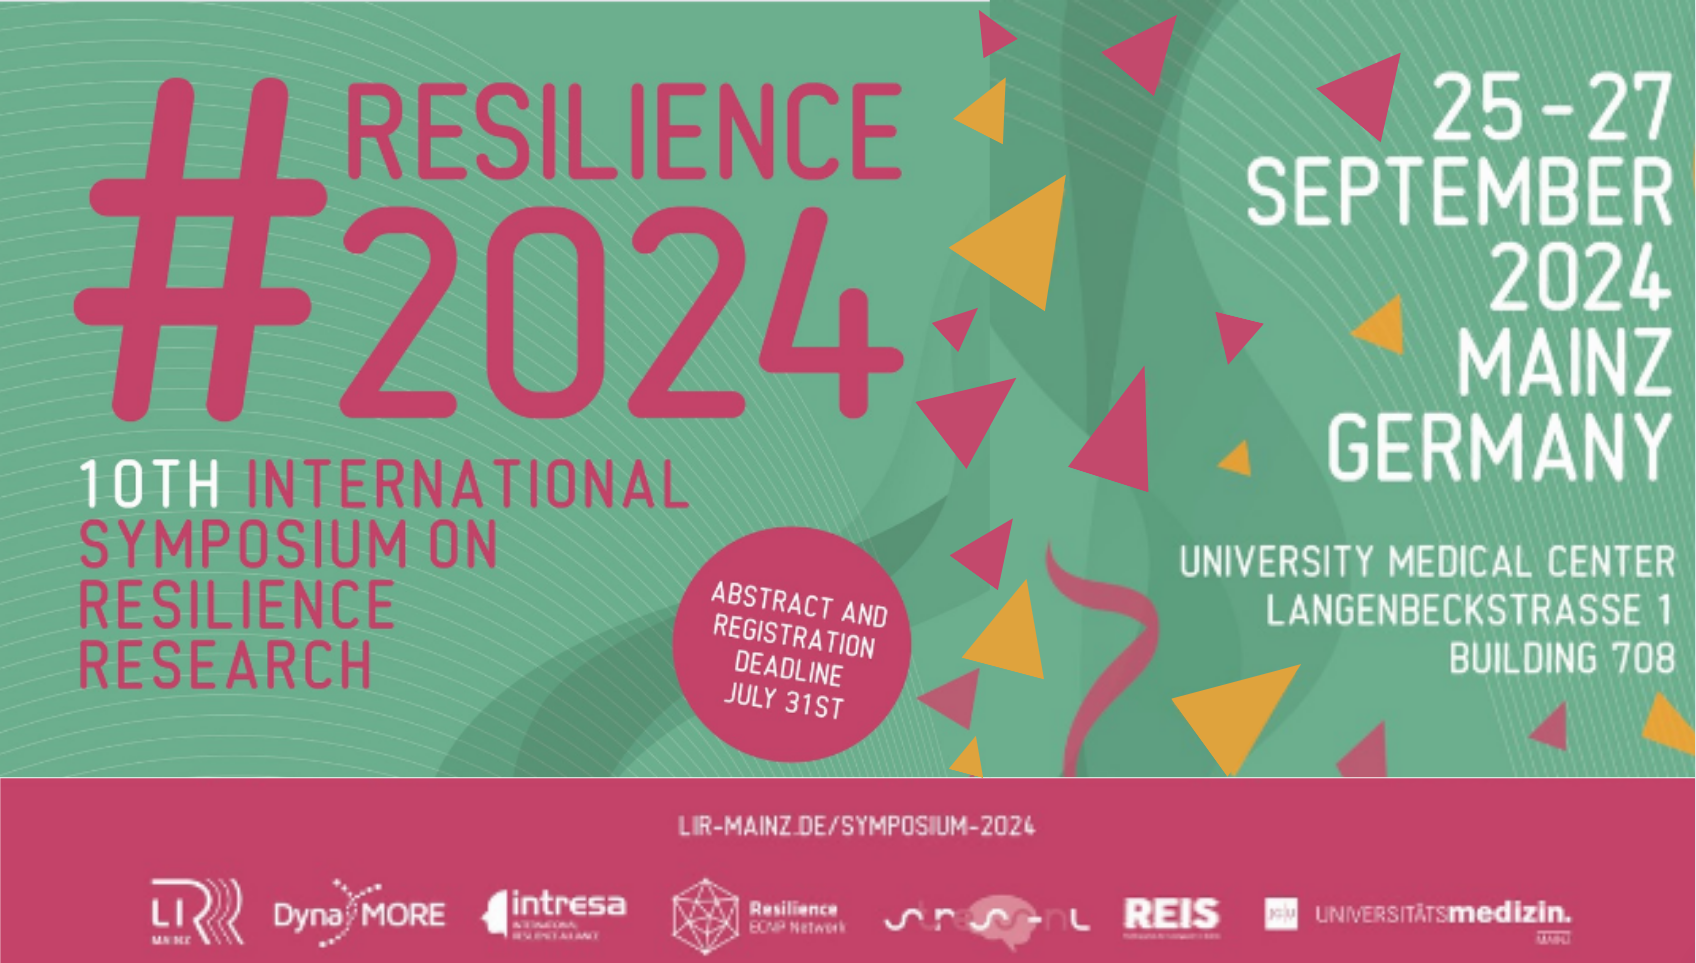 10 YEARS OF THE INTERNATIONAL RESILIENCE SYMPOSIUM - BE PART OF IT!